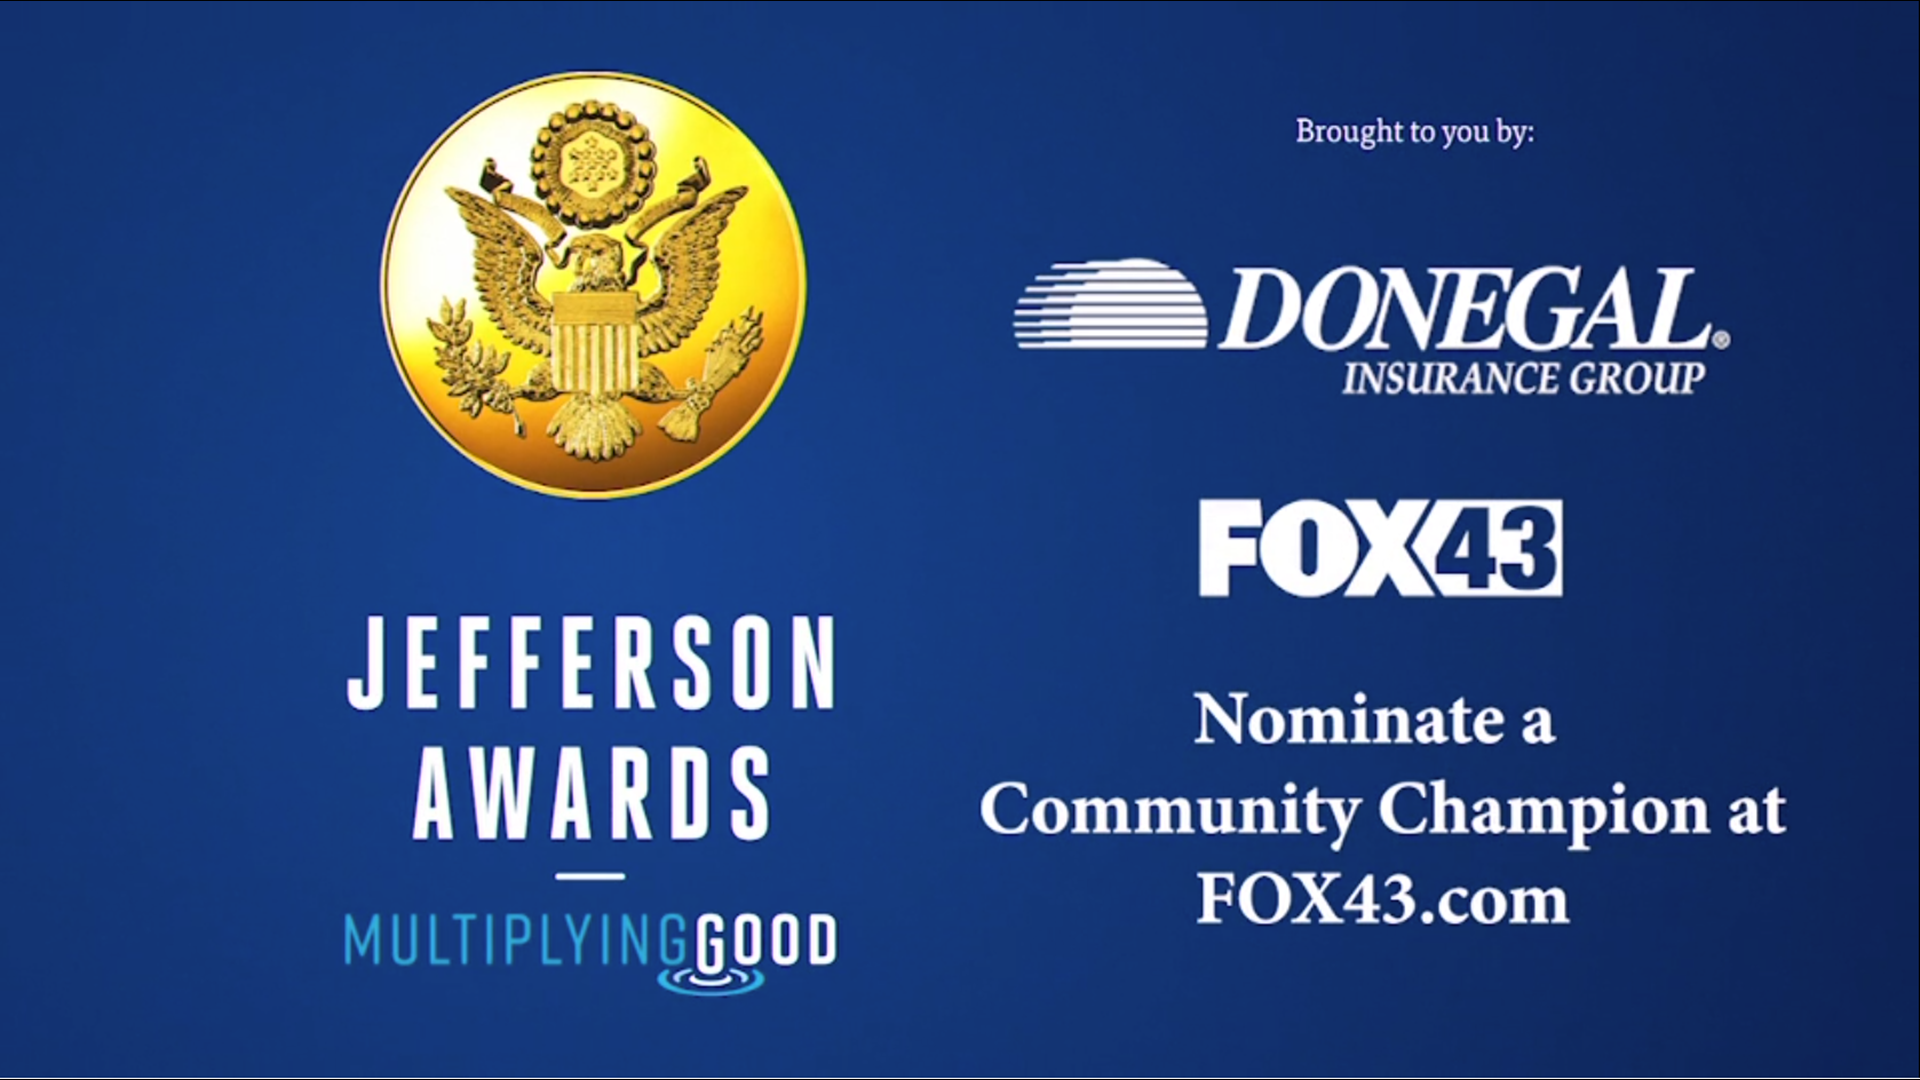 Gary Grant is just one of our nominees recommended for the Jefferson Awards, thanks to his work helping feed the needy.